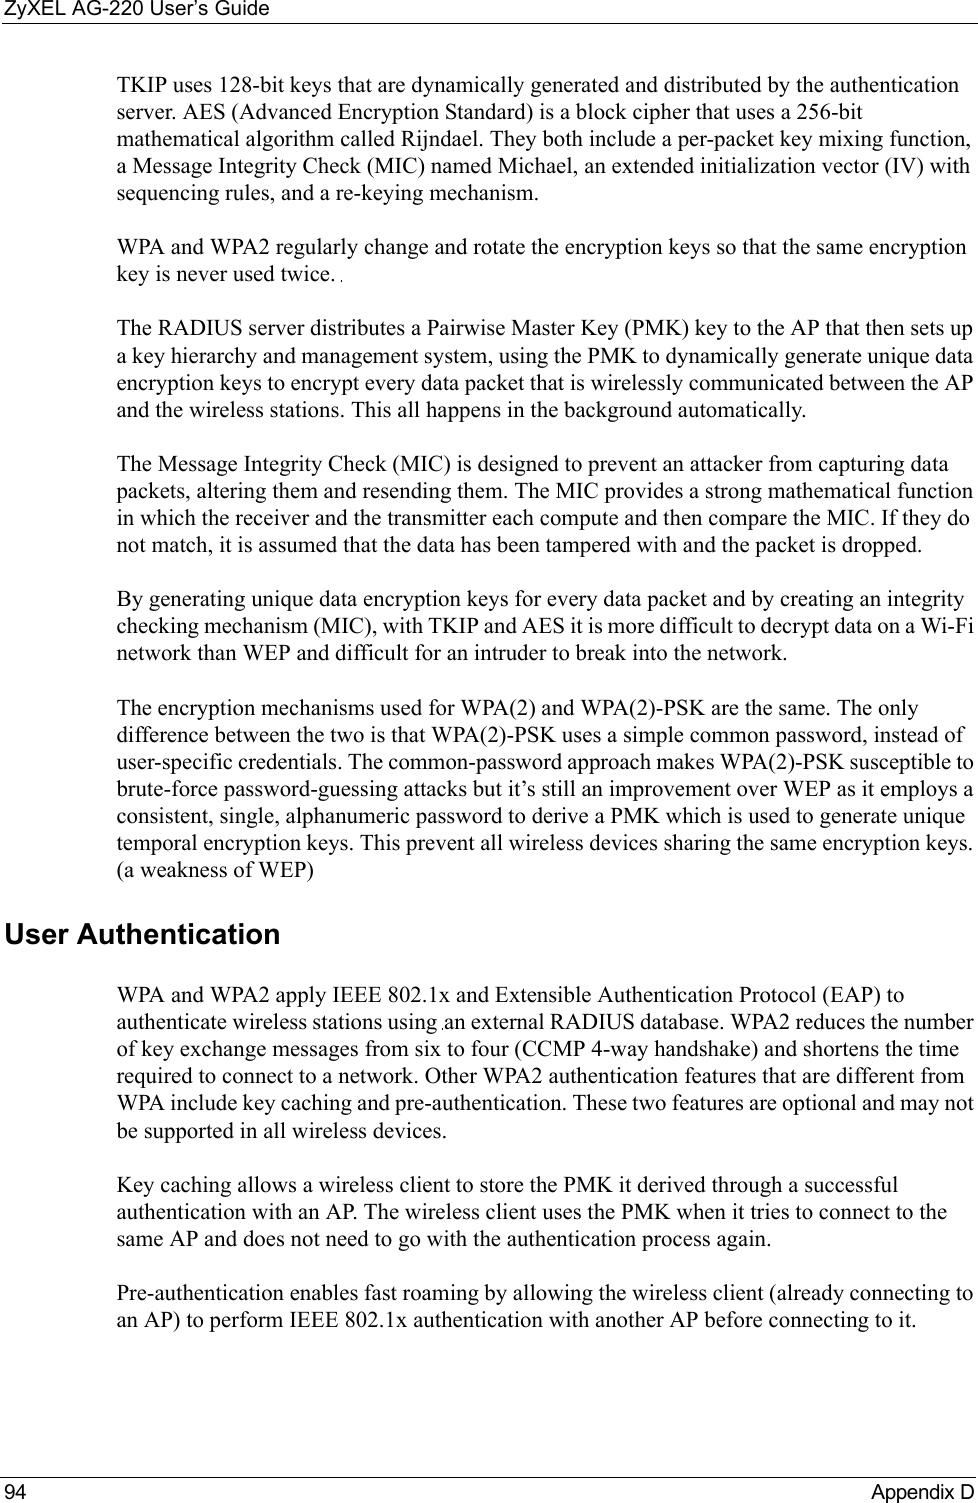 ZyXEL AG-220 User’s Guide94 Appendix DTKIP uses 128-bit keys that are dynamically generated and distributed by the authentication server. AES (Advanced Encryption Standard) is a block cipher that uses a 256-bit mathematical algorithm called Rijndael. They both include a per-packet key mixing function, a Message Integrity Check (MIC) named Michael, an extended initialization vector (IV) with sequencing rules, and a re-keying mechanism.WPA and WPA2 regularly change and rotate the encryption keys so that the same encryption key is never used twice. The RADIUS server distributes a Pairwise Master Key (PMK) key to the AP that then sets up a key hierarchy and management system, using the PMK to dynamically generate unique data encryption keys to encrypt every data packet that is wirelessly communicated between the AP and the wireless stations. This all happens in the background automatically.The Message Integrity Check (MIC) is designed to prevent an attacker from capturing data packets, altering them and resending them. The MIC provides a strong mathematical function in which the receiver and the transmitter each compute and then compare the MIC. If they do not match, it is assumed that the data has been tampered with and the packet is dropped. By generating unique data encryption keys for every data packet and by creating an integrity checking mechanism (MIC), with TKIP and AES it is more difficult to decrypt data on a Wi-Fi network than WEP and difficult for an intruder to break into the network. The encryption mechanisms used for WPA(2) and WPA(2)-PSK are the same. The only difference between the two is that WPA(2)-PSK uses a simple common password, instead of user-specific credentials. The common-password approach makes WPA(2)-PSK susceptible to brute-force password-guessing attacks but it’s still an improvement over WEP as it employs a consistent, single, alphanumeric password to derive a PMK which is used to generate unique temporal encryption keys. This prevent all wireless devices sharing the same encryption keys. (a weakness of WEP)User Authentication WPA and WPA2 apply IEEE 802.1x and Extensible Authentication Protocol (EAP) to authenticate wireless stations using an external RADIUS database. WPA2 reduces the number of key exchange messages from six to four (CCMP 4-way handshake) and shortens the time required to connect to a network. Other WPA2 authentication features that are different from WPA include key caching and pre-authentication. These two features are optional and may not be supported in all wireless devices.Key caching allows a wireless client to store the PMK it derived through a successful authentication with an AP. The wireless client uses the PMK when it tries to connect to the same AP and does not need to go with the authentication process again.Pre-authentication enables fast roaming by allowing the wireless client (already connecting to an AP) to perform IEEE 802.1x authentication with another AP before connecting to it.